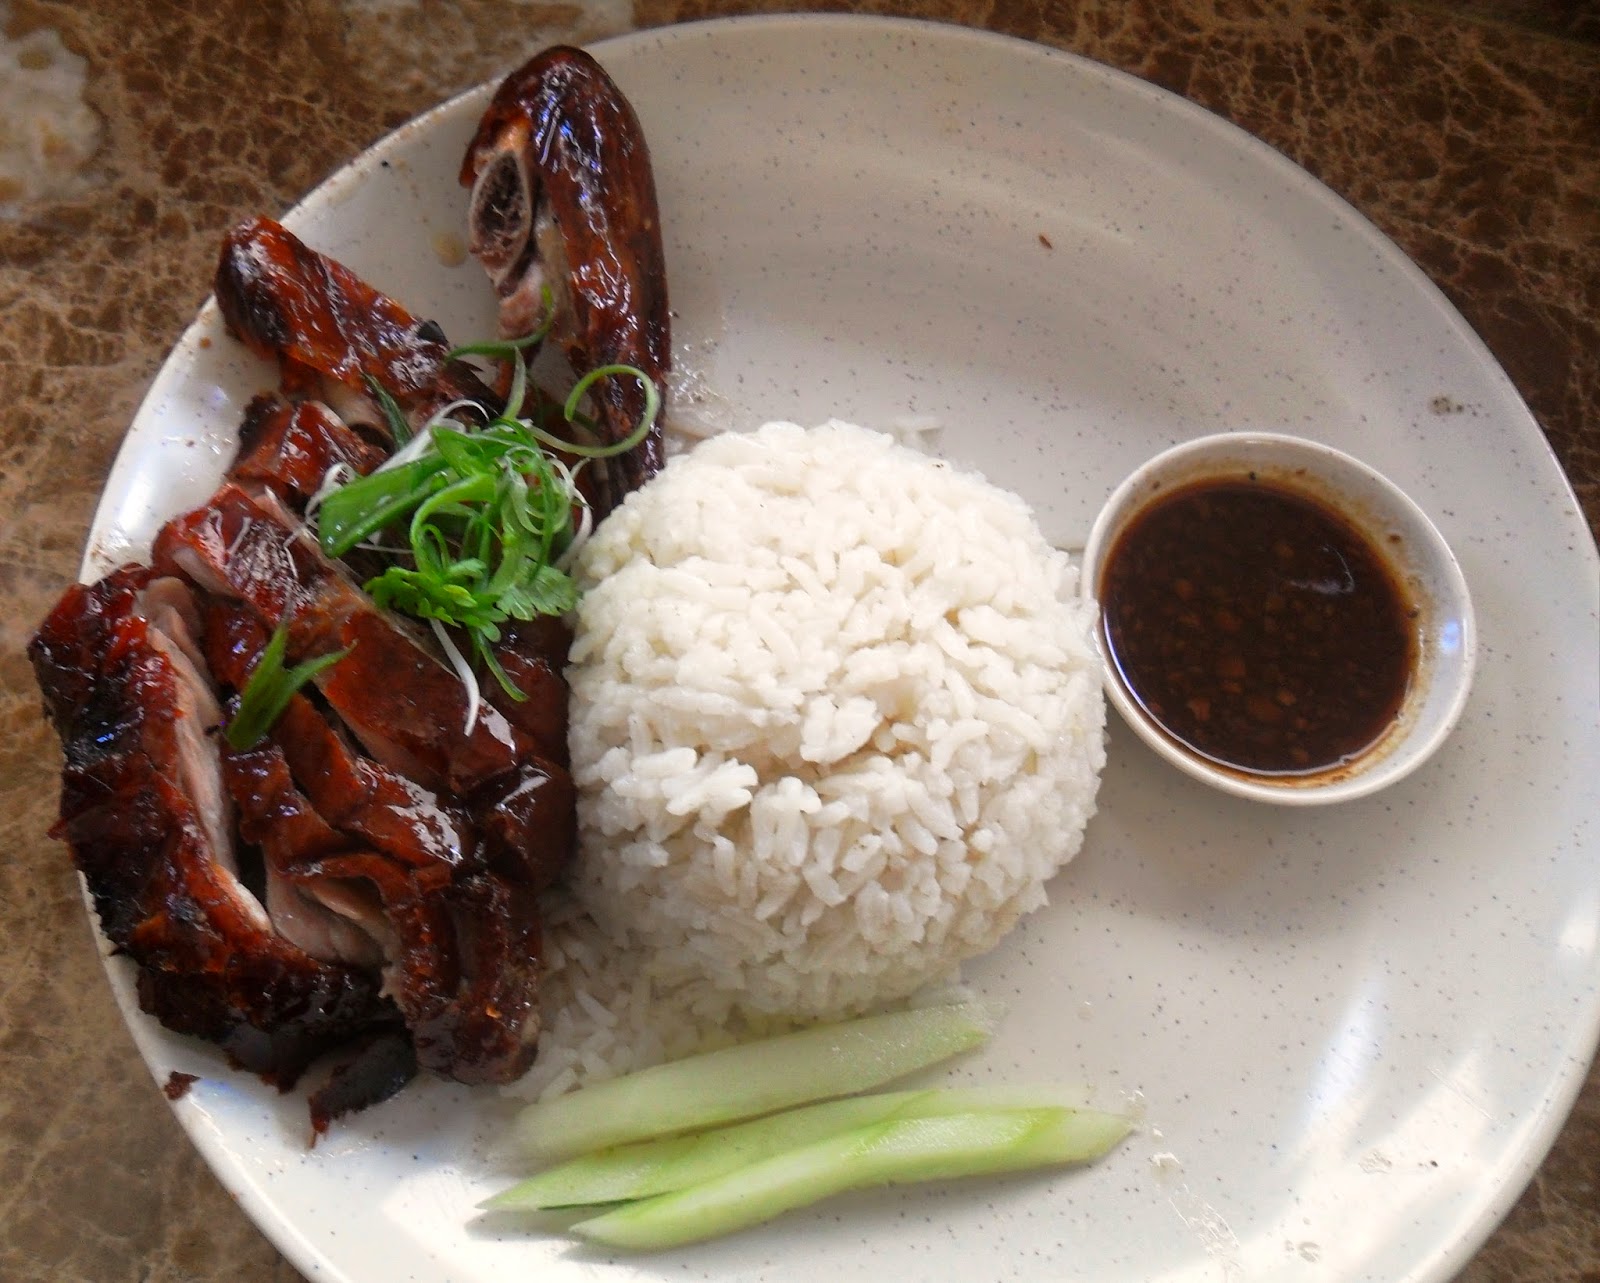 Ewe Paik Leong, The Wordslinger: Stick to the roast duck in Kepong’s ...